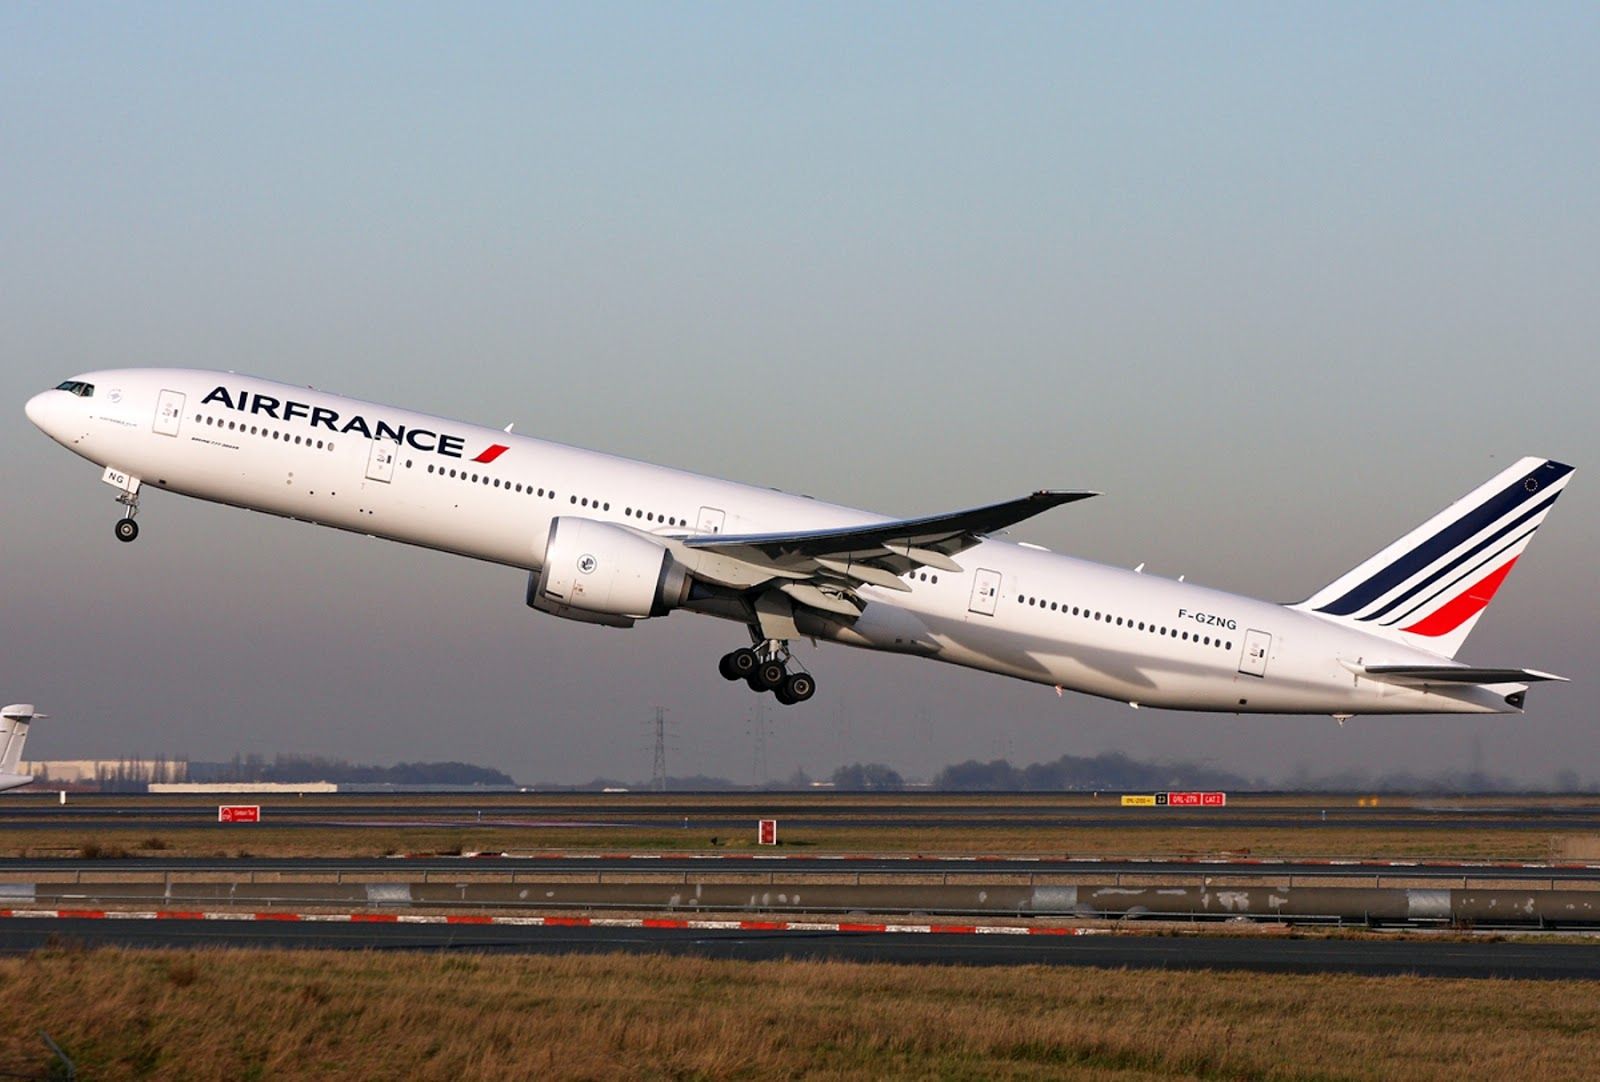 Boeing 777 300ER Of Air France Takeoff Aircraft Wallpaper 3326